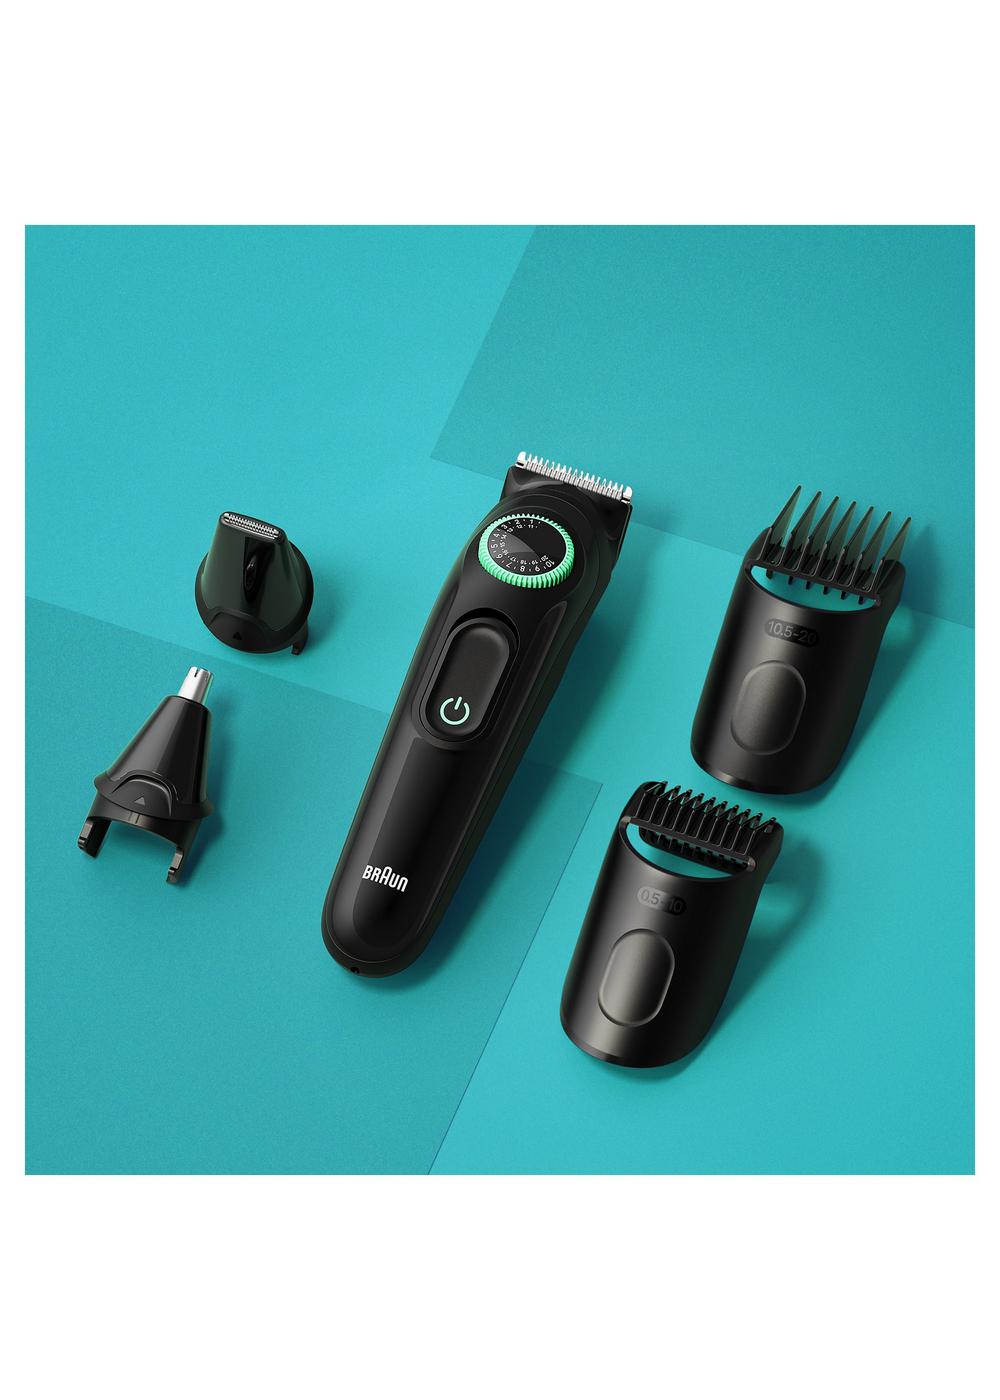 Braun All-In-One Style Kit 3 3450, 5-in-1 Trimmer for Men Shop Electric Shavers & Trimmers at